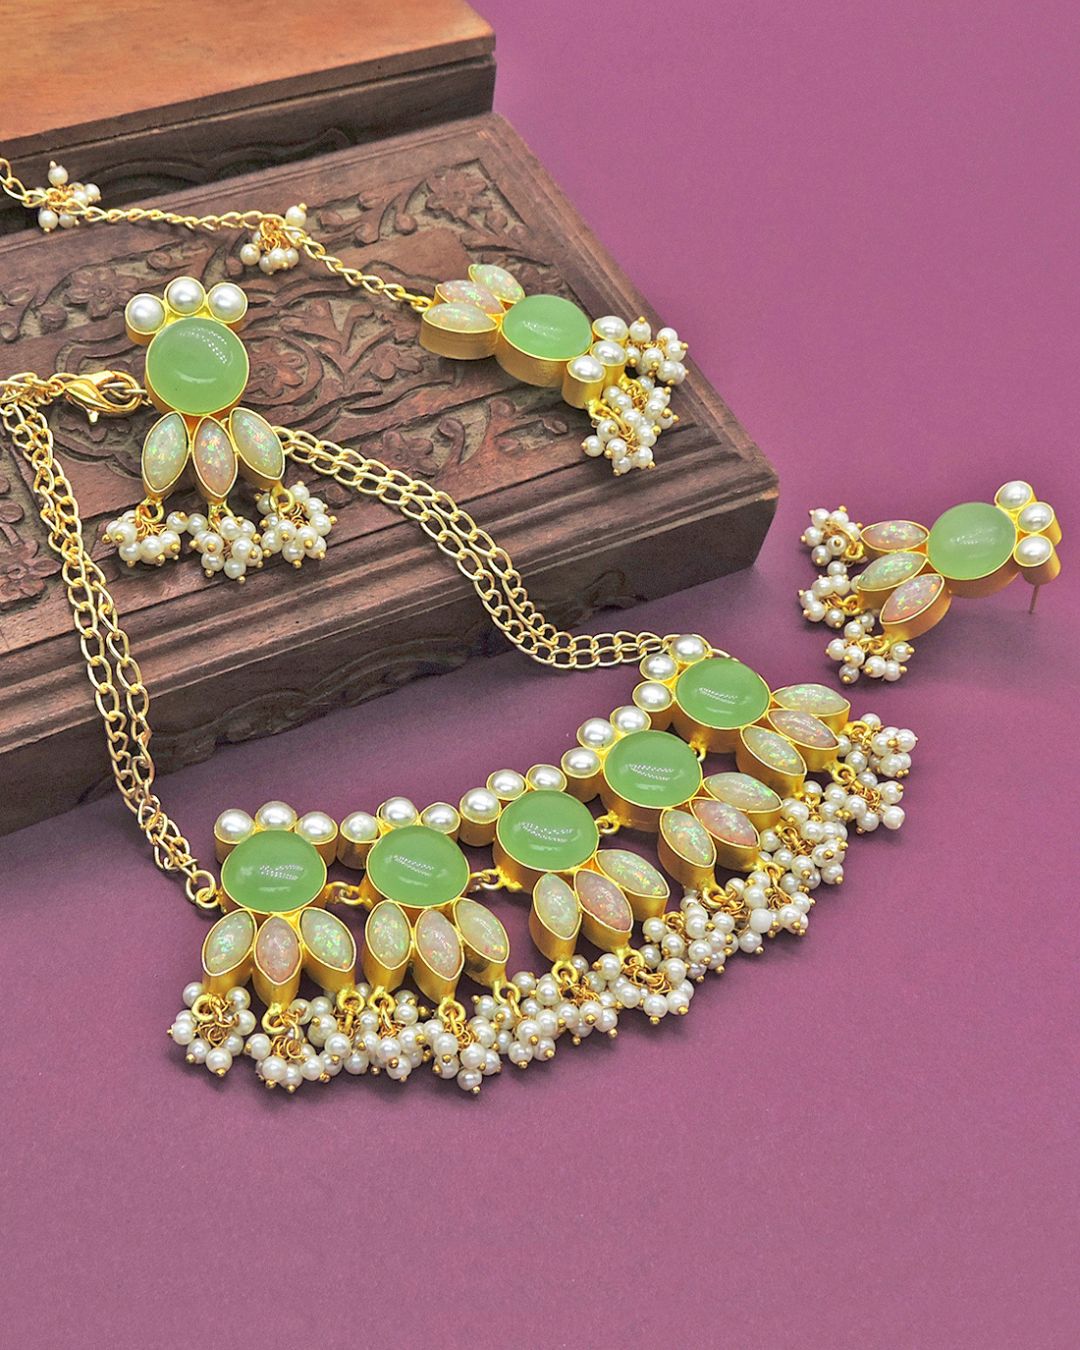 Margaret Necklace & Earrings Set - Necklaces - Earrings - Handcrafted Jewellery - Made in India - Dubai Jewellery, Fashion & Lifestyle - Dori